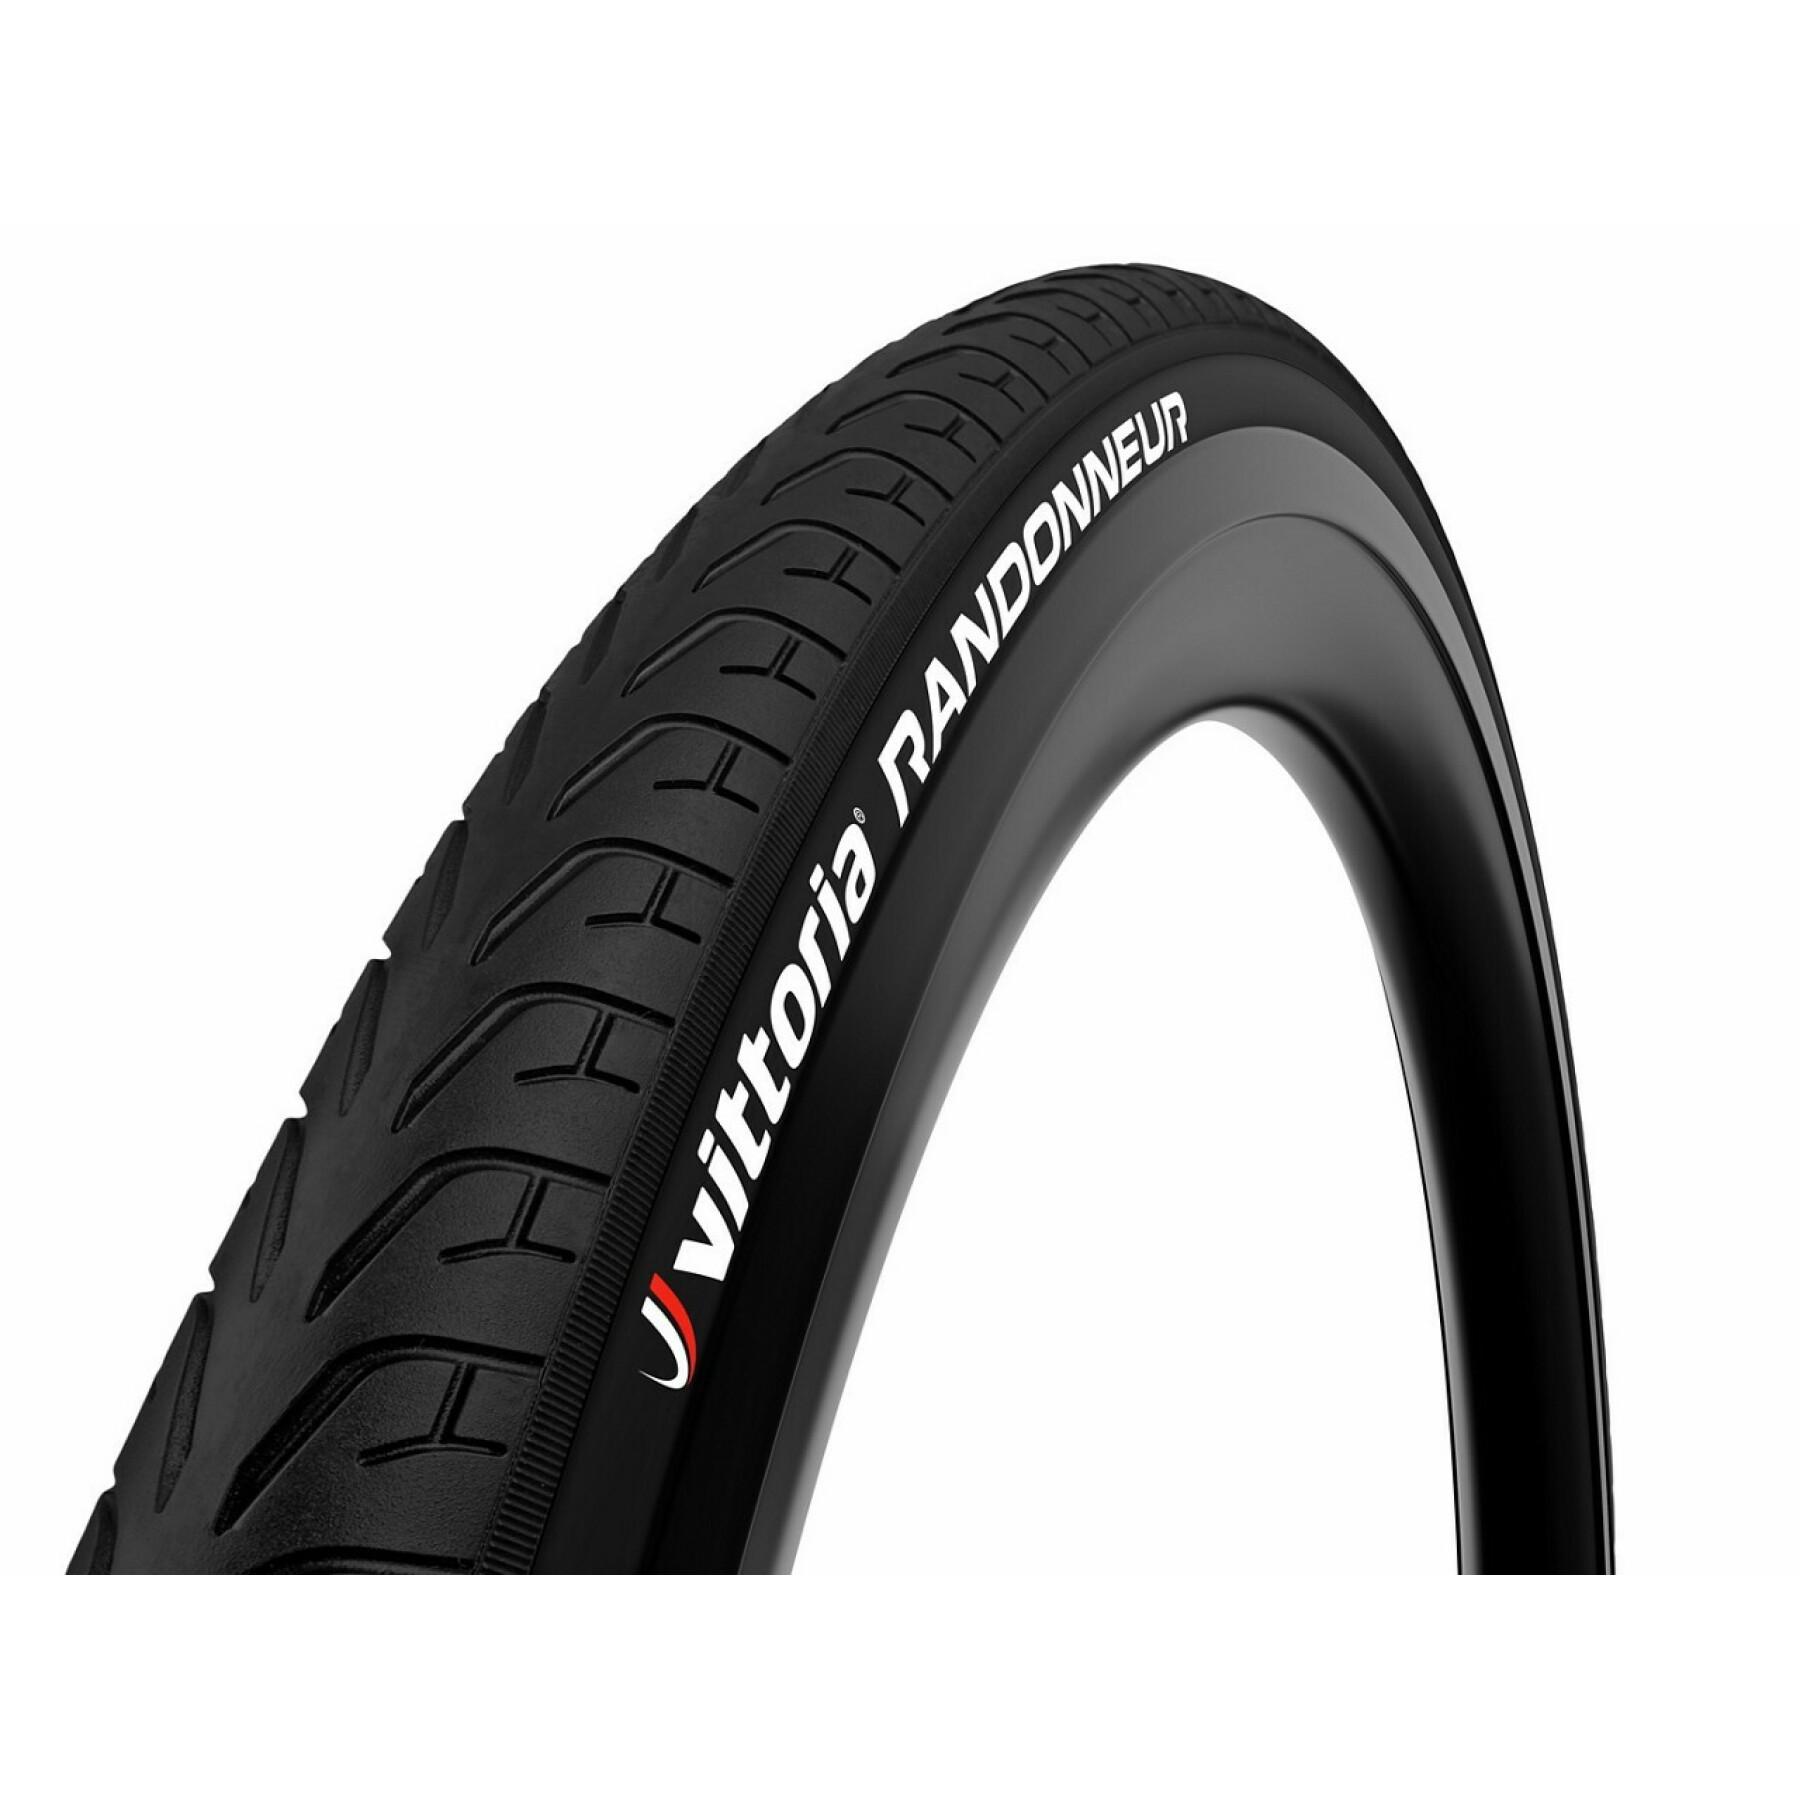 Hiker tire without reflective tape Vittoria City